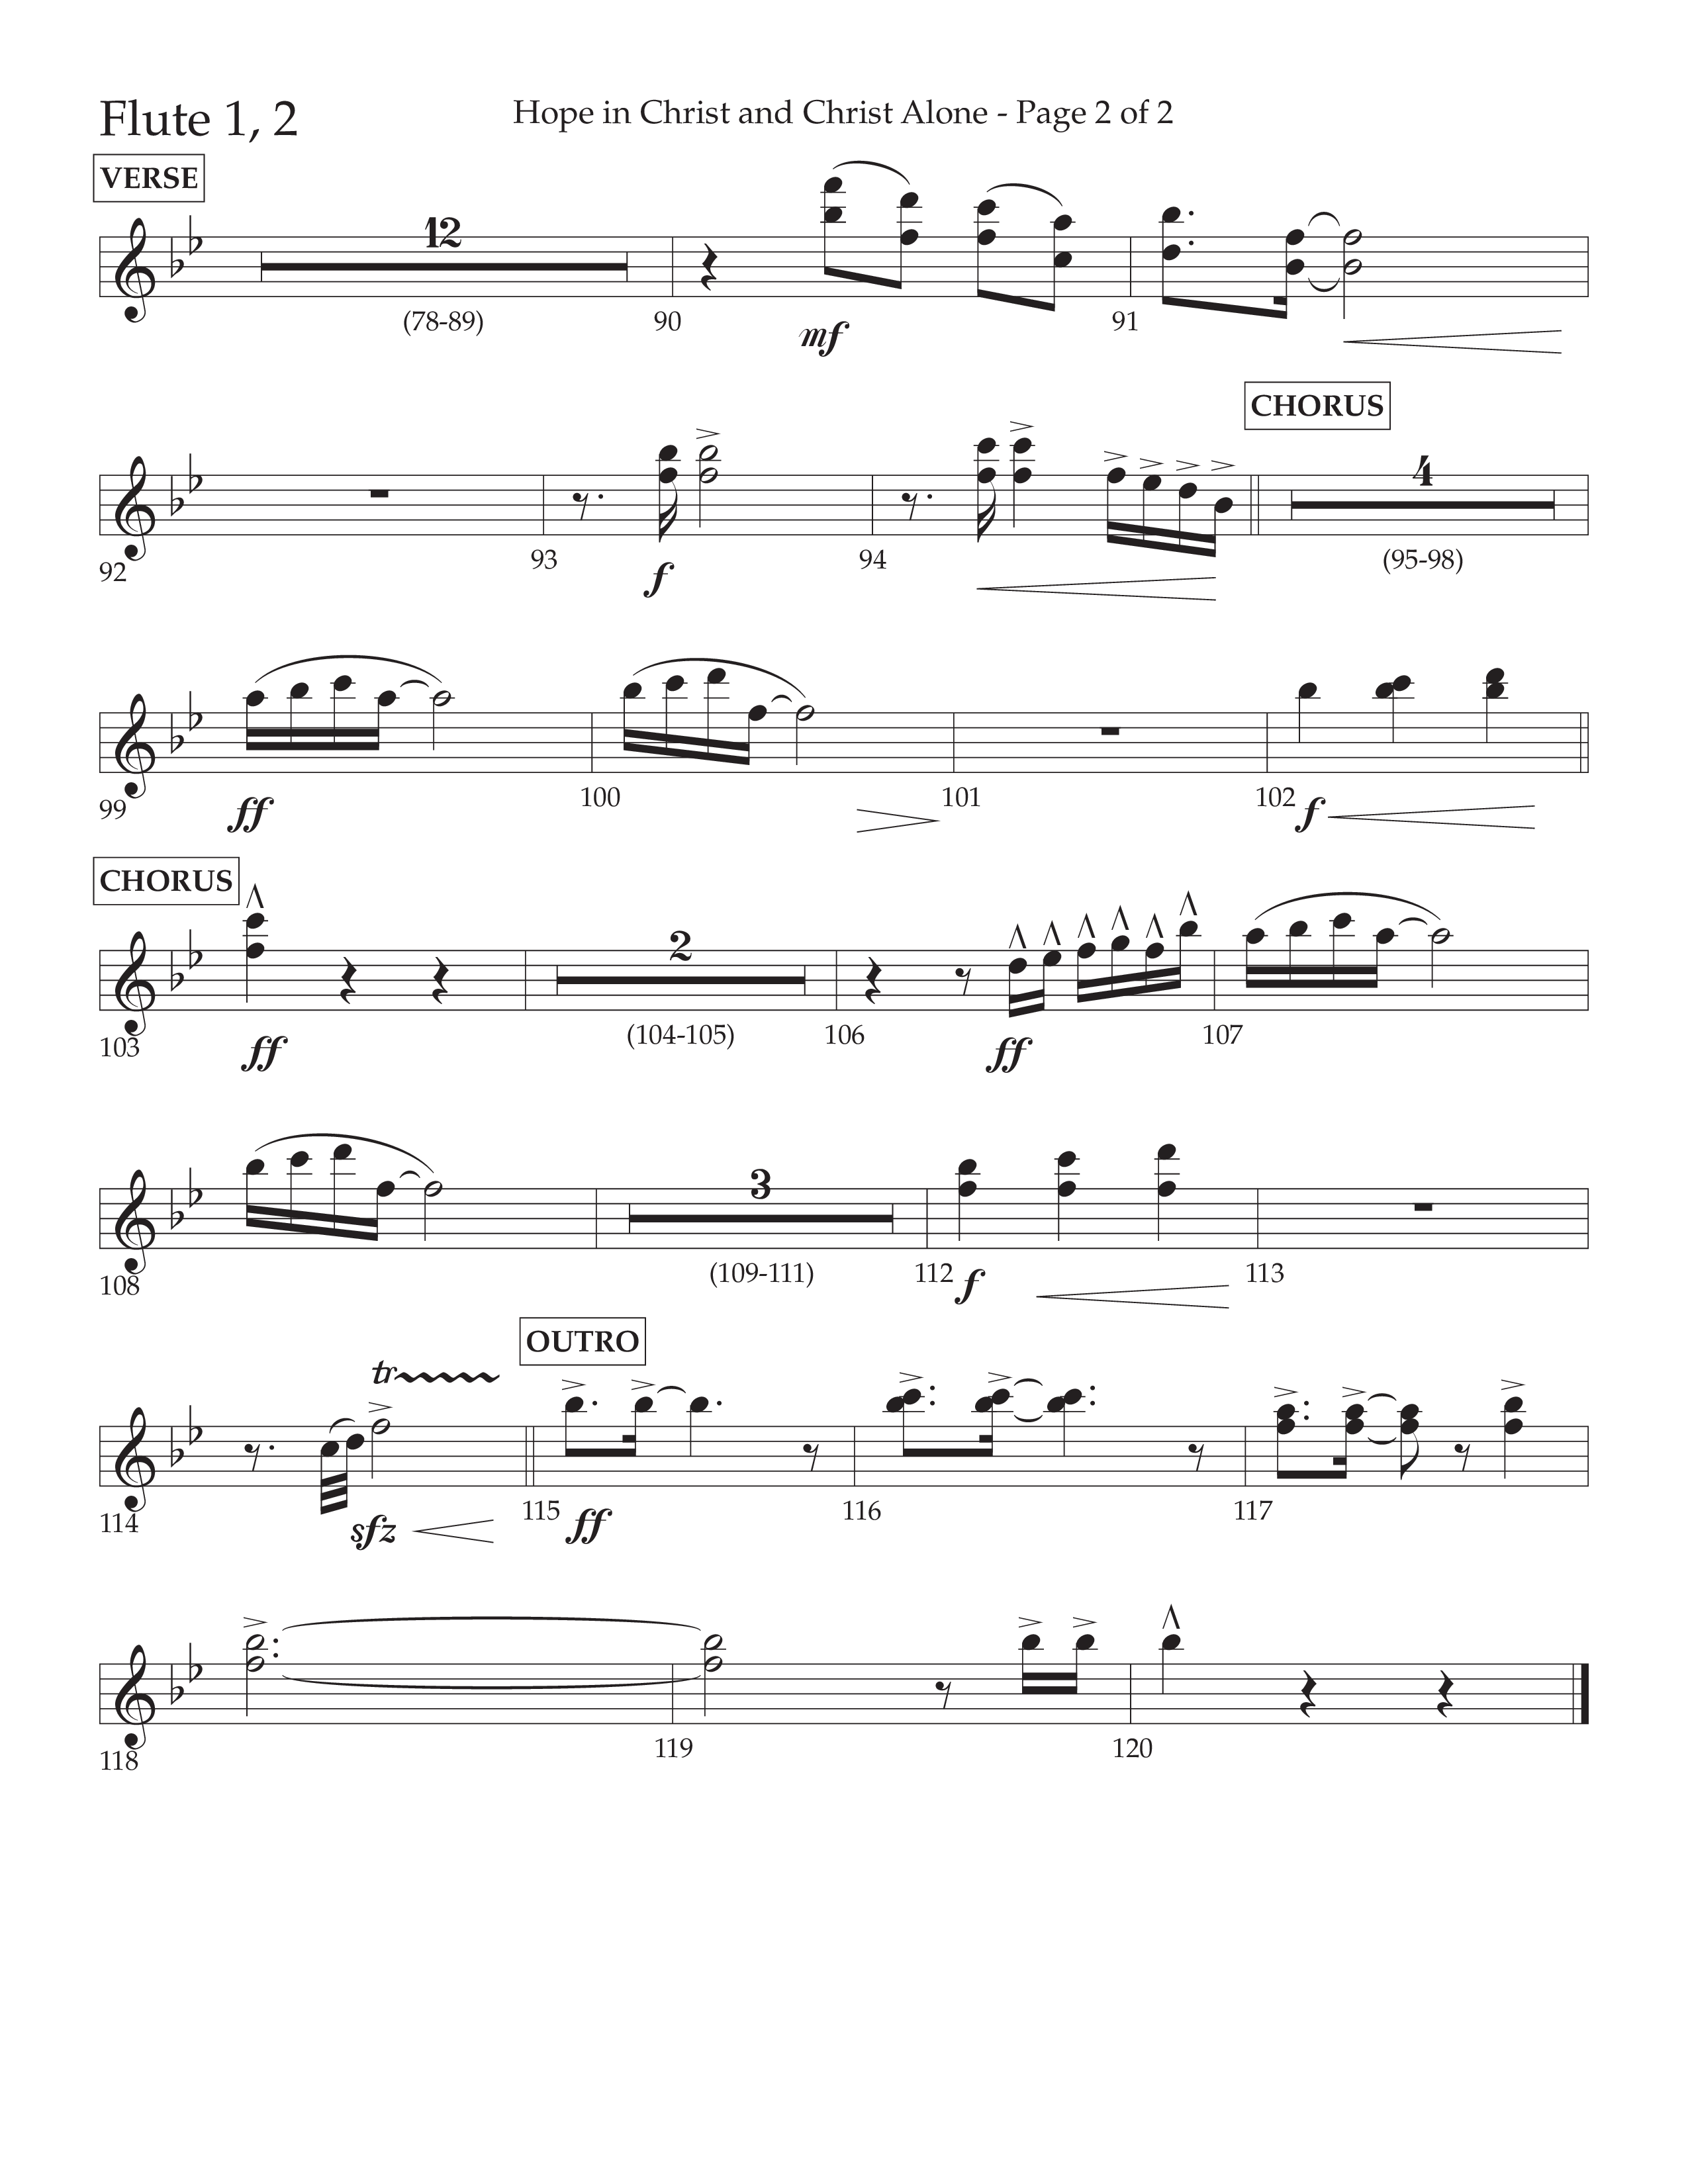 Hope In Christ And Christ Alone (Choral Anthem SATB) Flute 1/2 (Lifeway Choral / Arr. Cliff Duren)